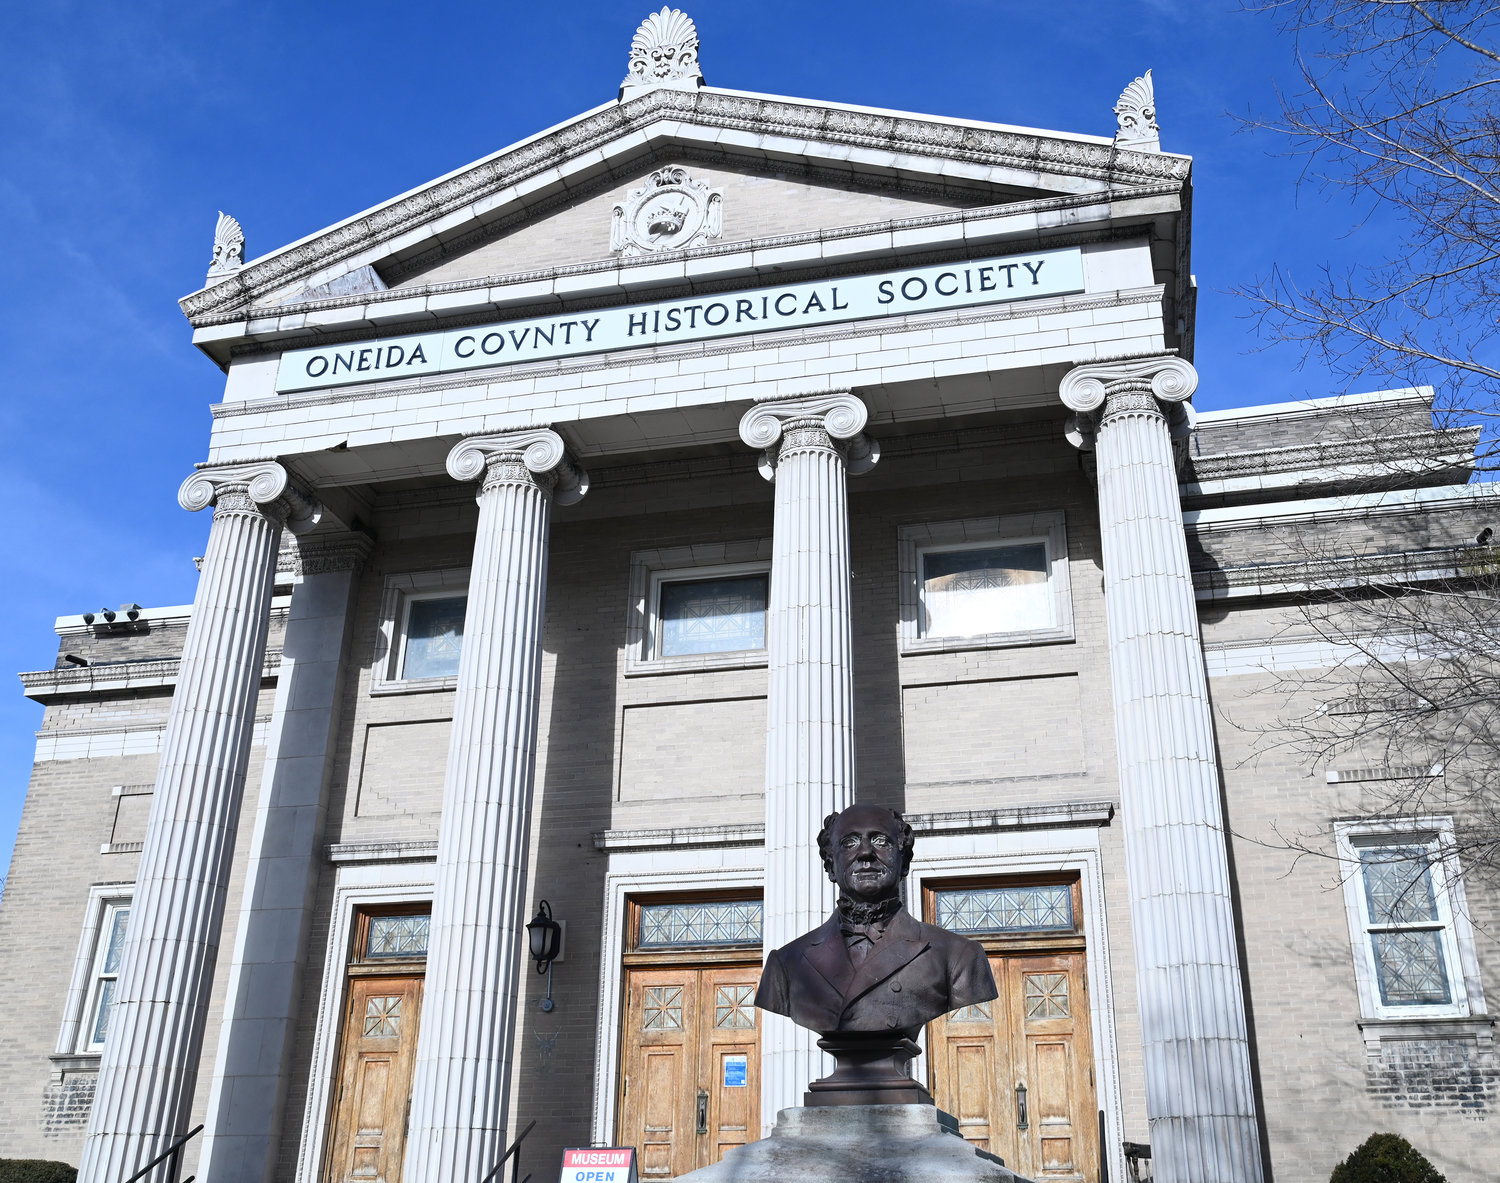 The exterior of the Oneida County History Center on Genesee Street in Utica on Tuesday, Feb. 7.